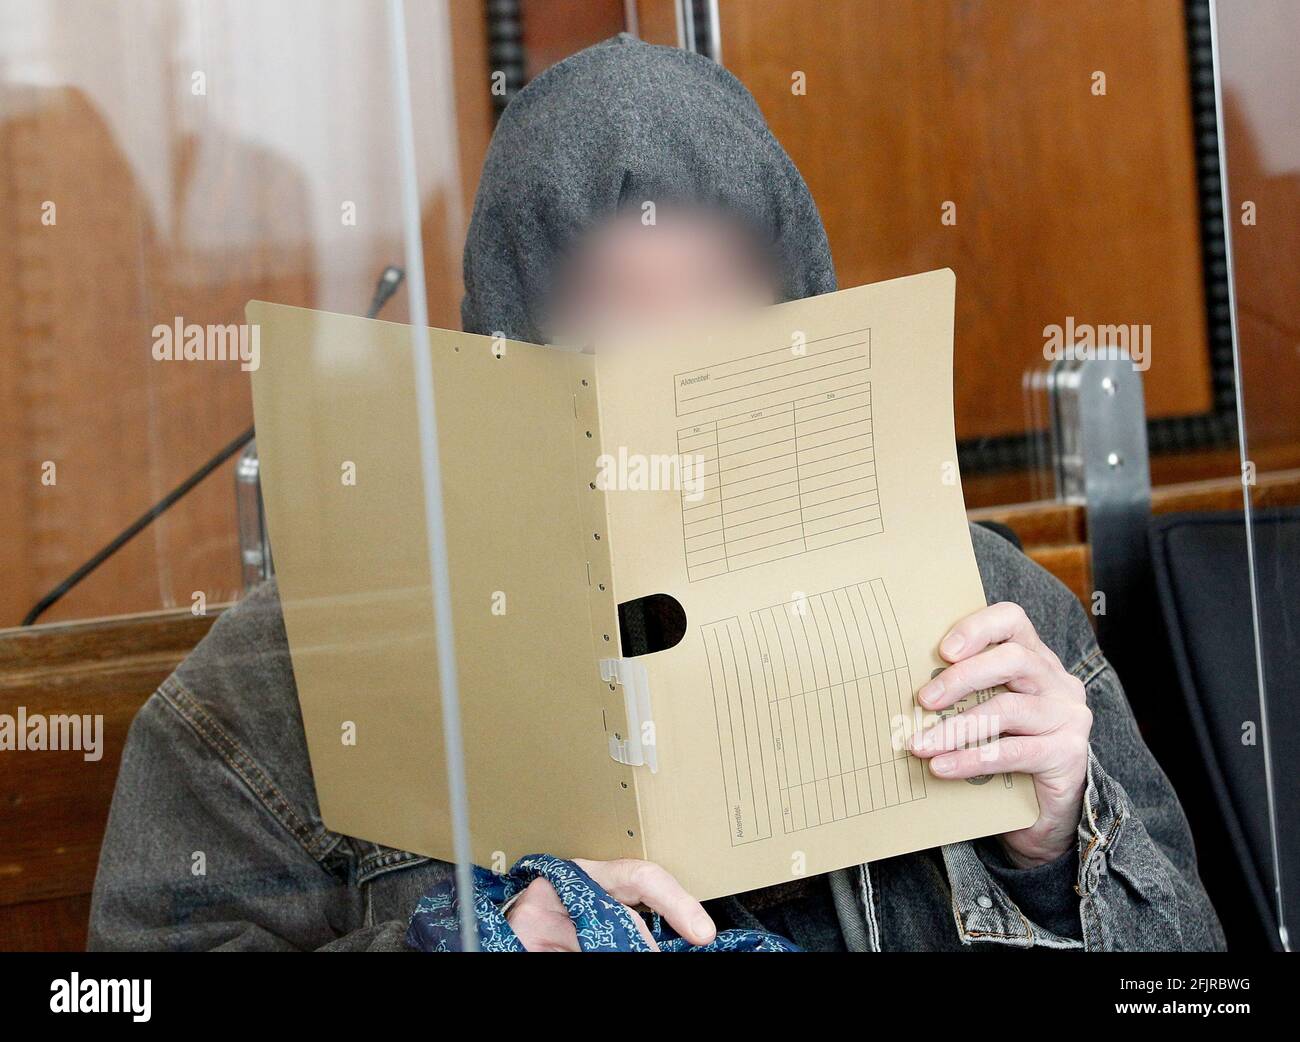 26 April 2021, North Rhine-Westphalia, Mönchengladbach: The accused nurse waits in the courtroom for the trial to begin. The 64-year-old is alleged to have killed a patient in orthopaedics with an overdose of sedatives in a hospital for people with special needs. Photo: Roland Weihrauch/dpa - ATTENTION: Person(s) have been pixelated for legal reasons Stock Photo